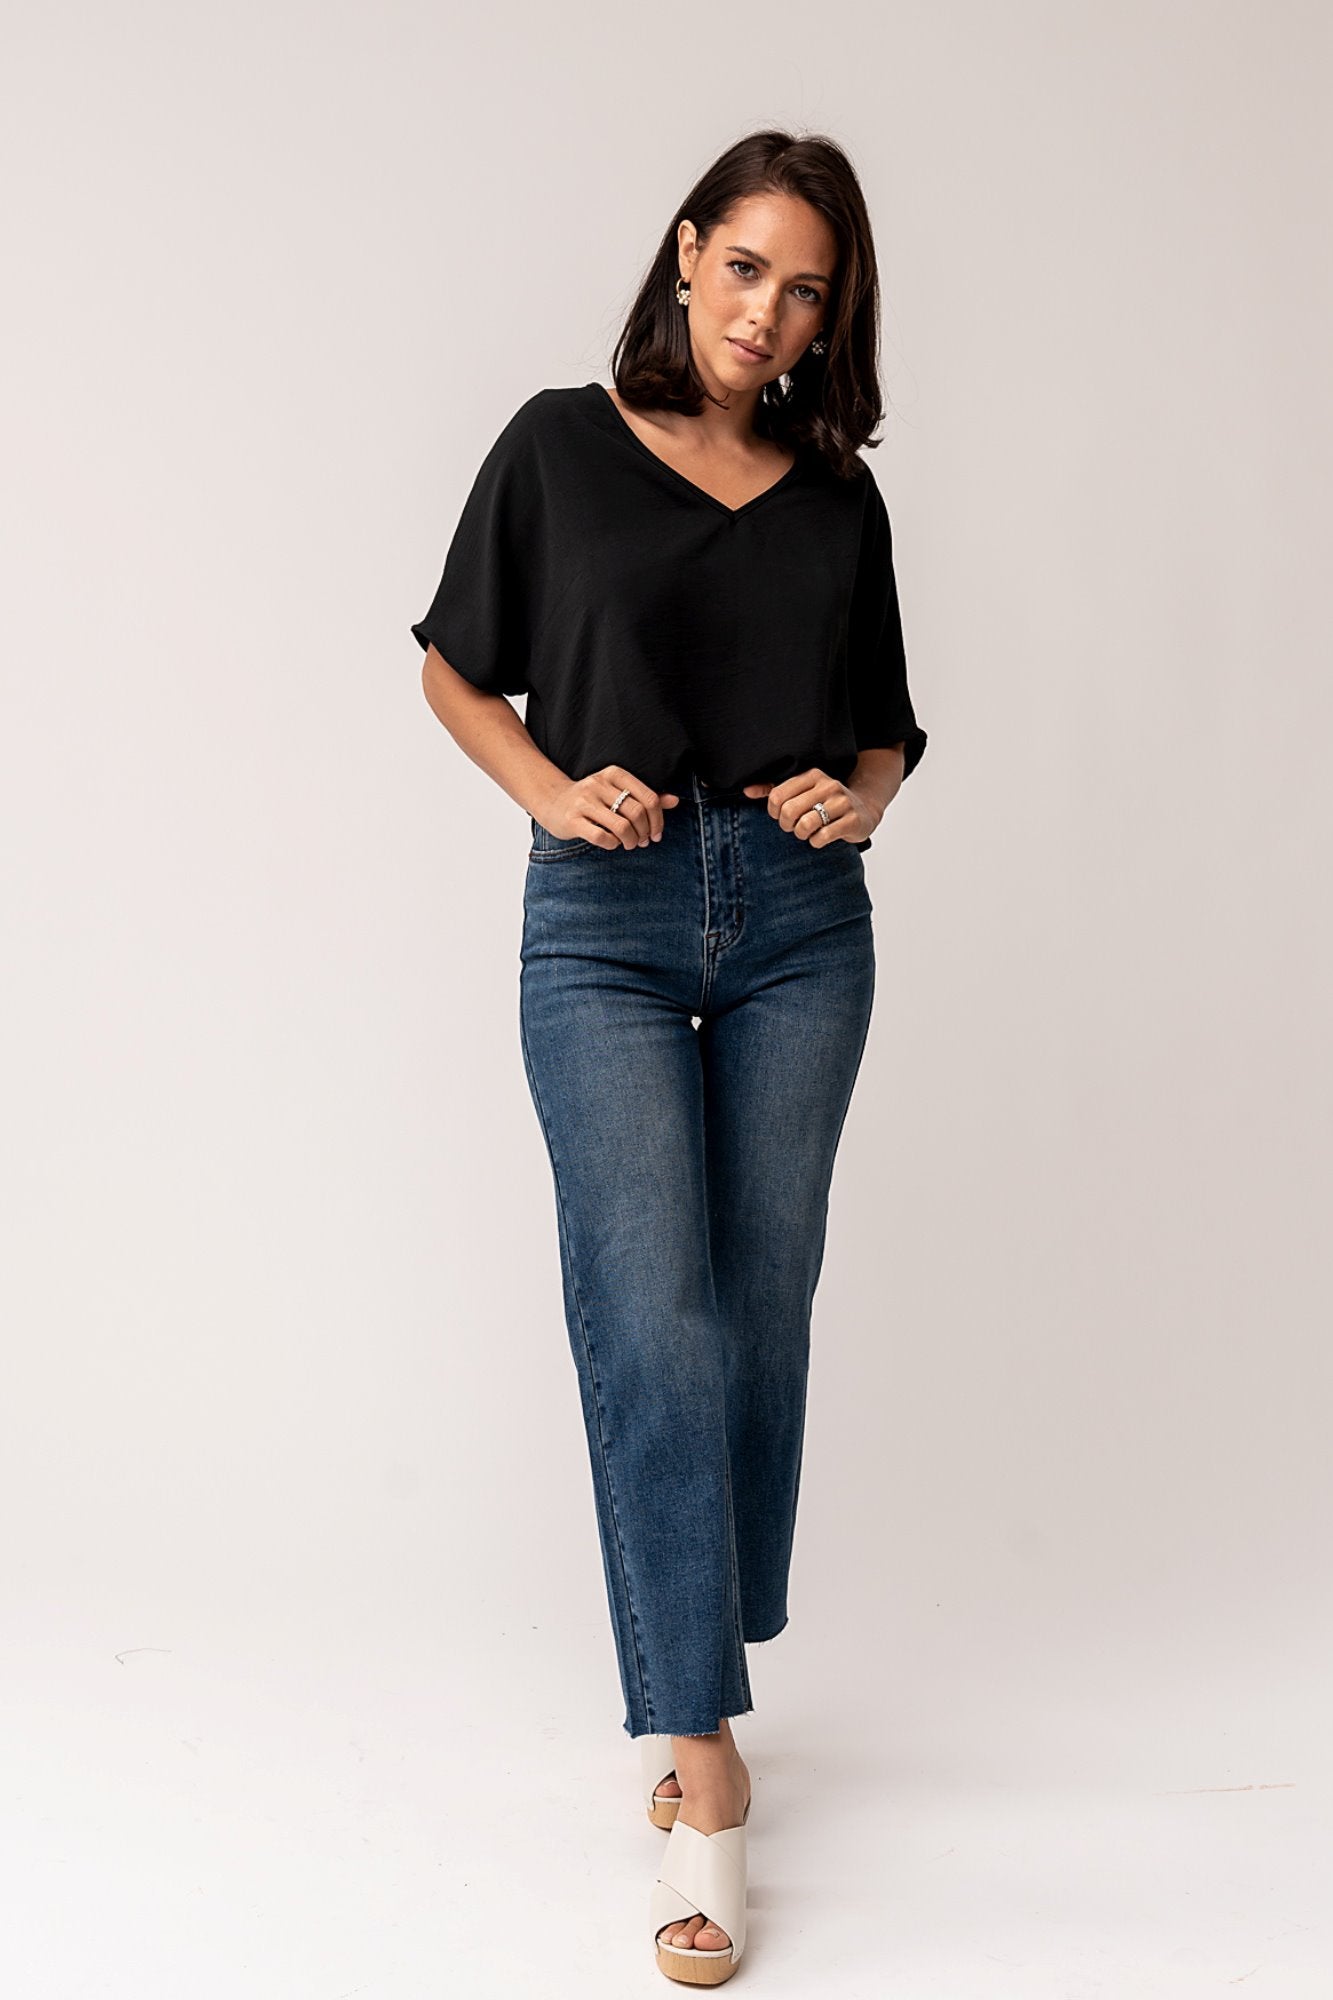 Haven Blouse in Black - RESTOCK COMING Clothing Holley Girl 